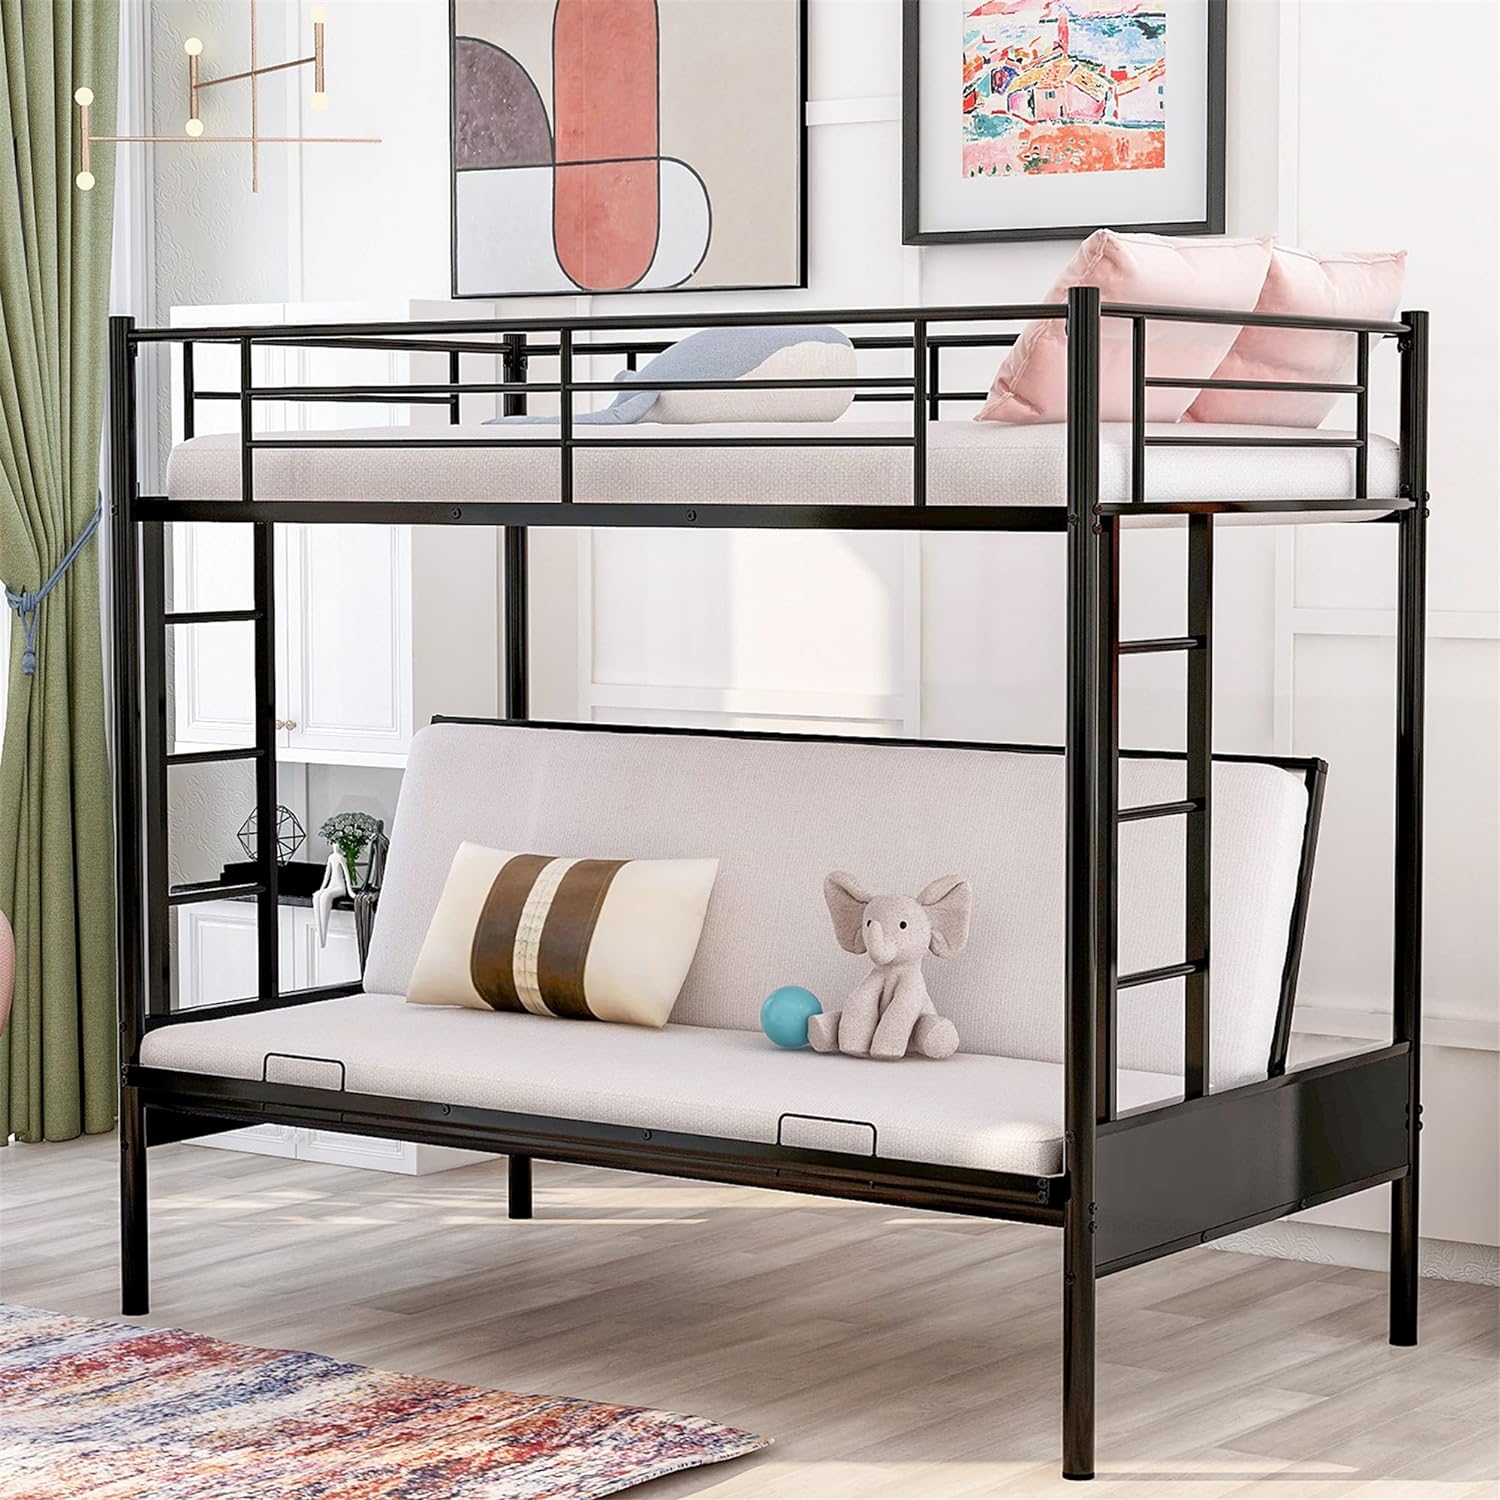 Box Spring Bunk Bed, Full Size Bunk Bed Box Spring